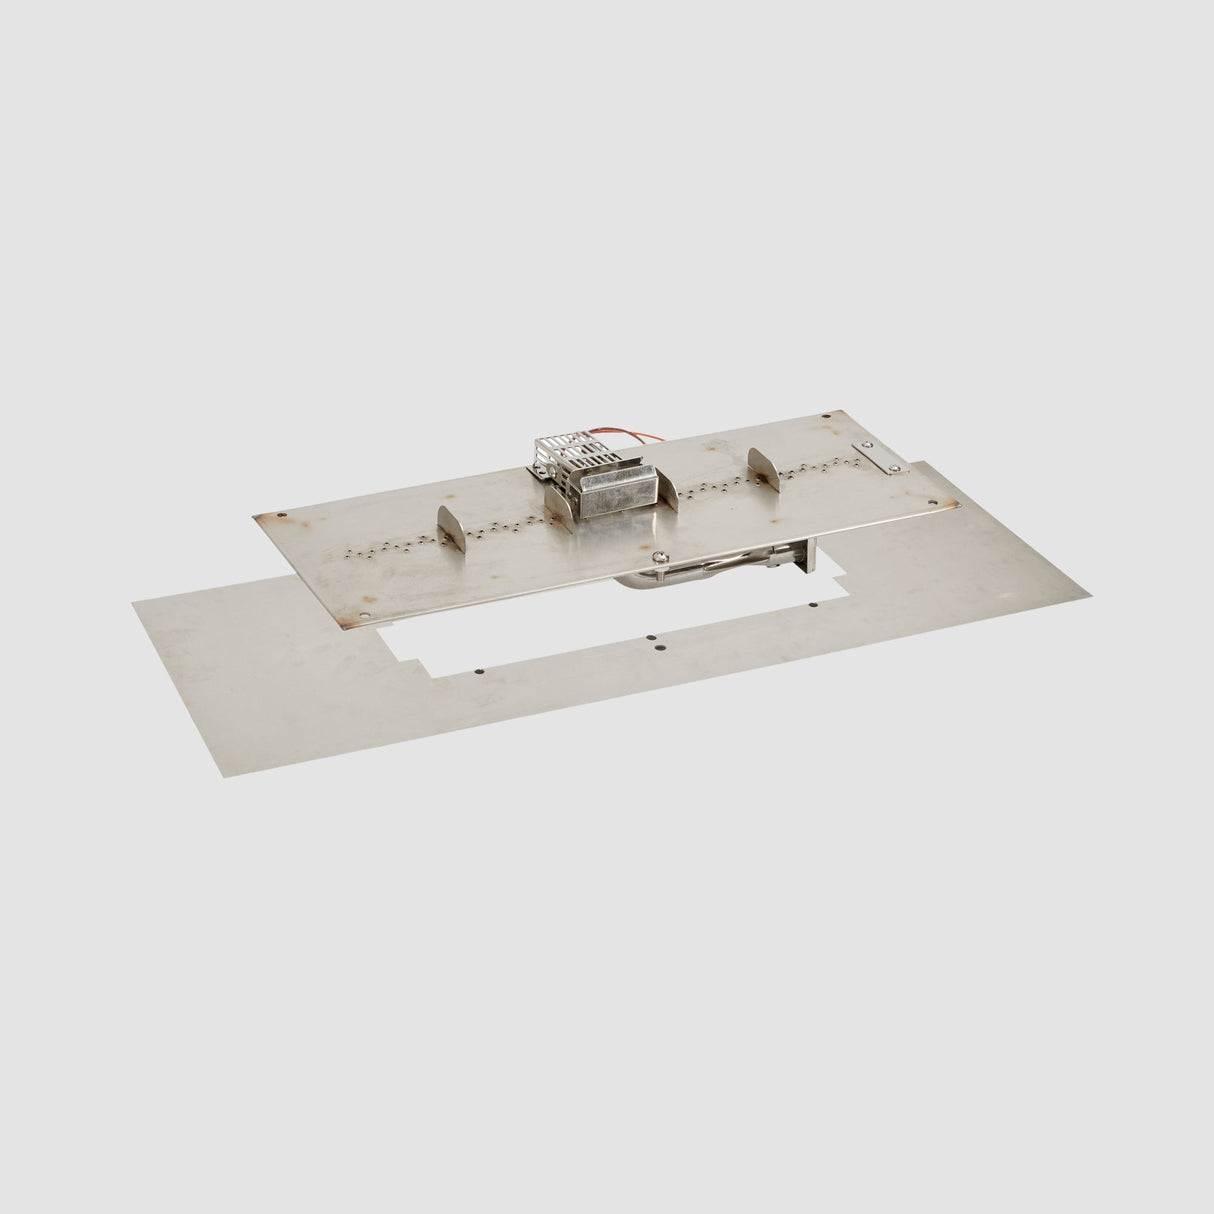 The 24" Crystal Fire Plus Linear Gas Burner Insert and Plate Kit on a grey background